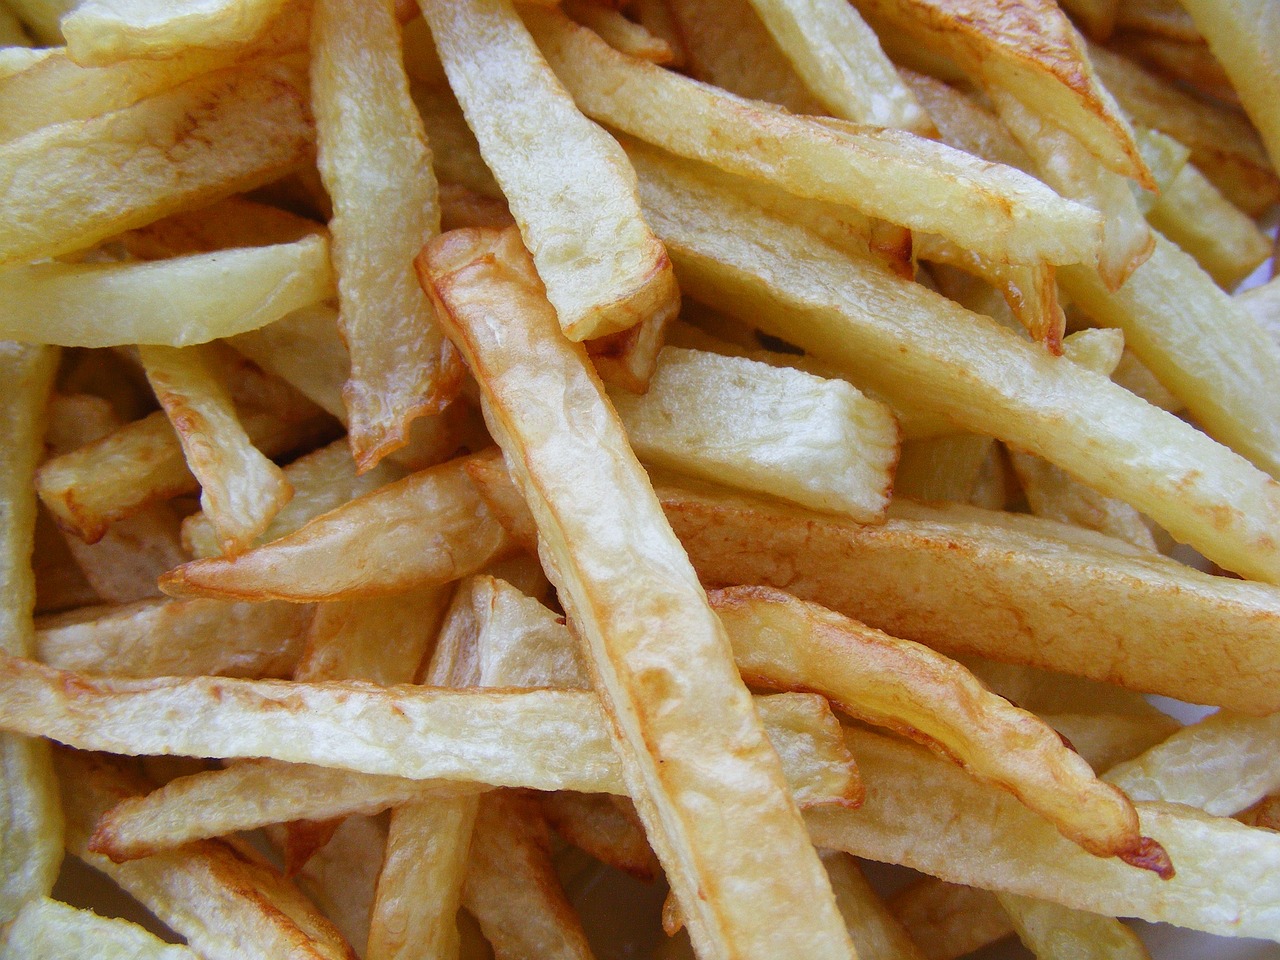 a close up of a pile of french fries, renaissance, annie leibowit, ultra texture, 4 0 9 6, cuisine